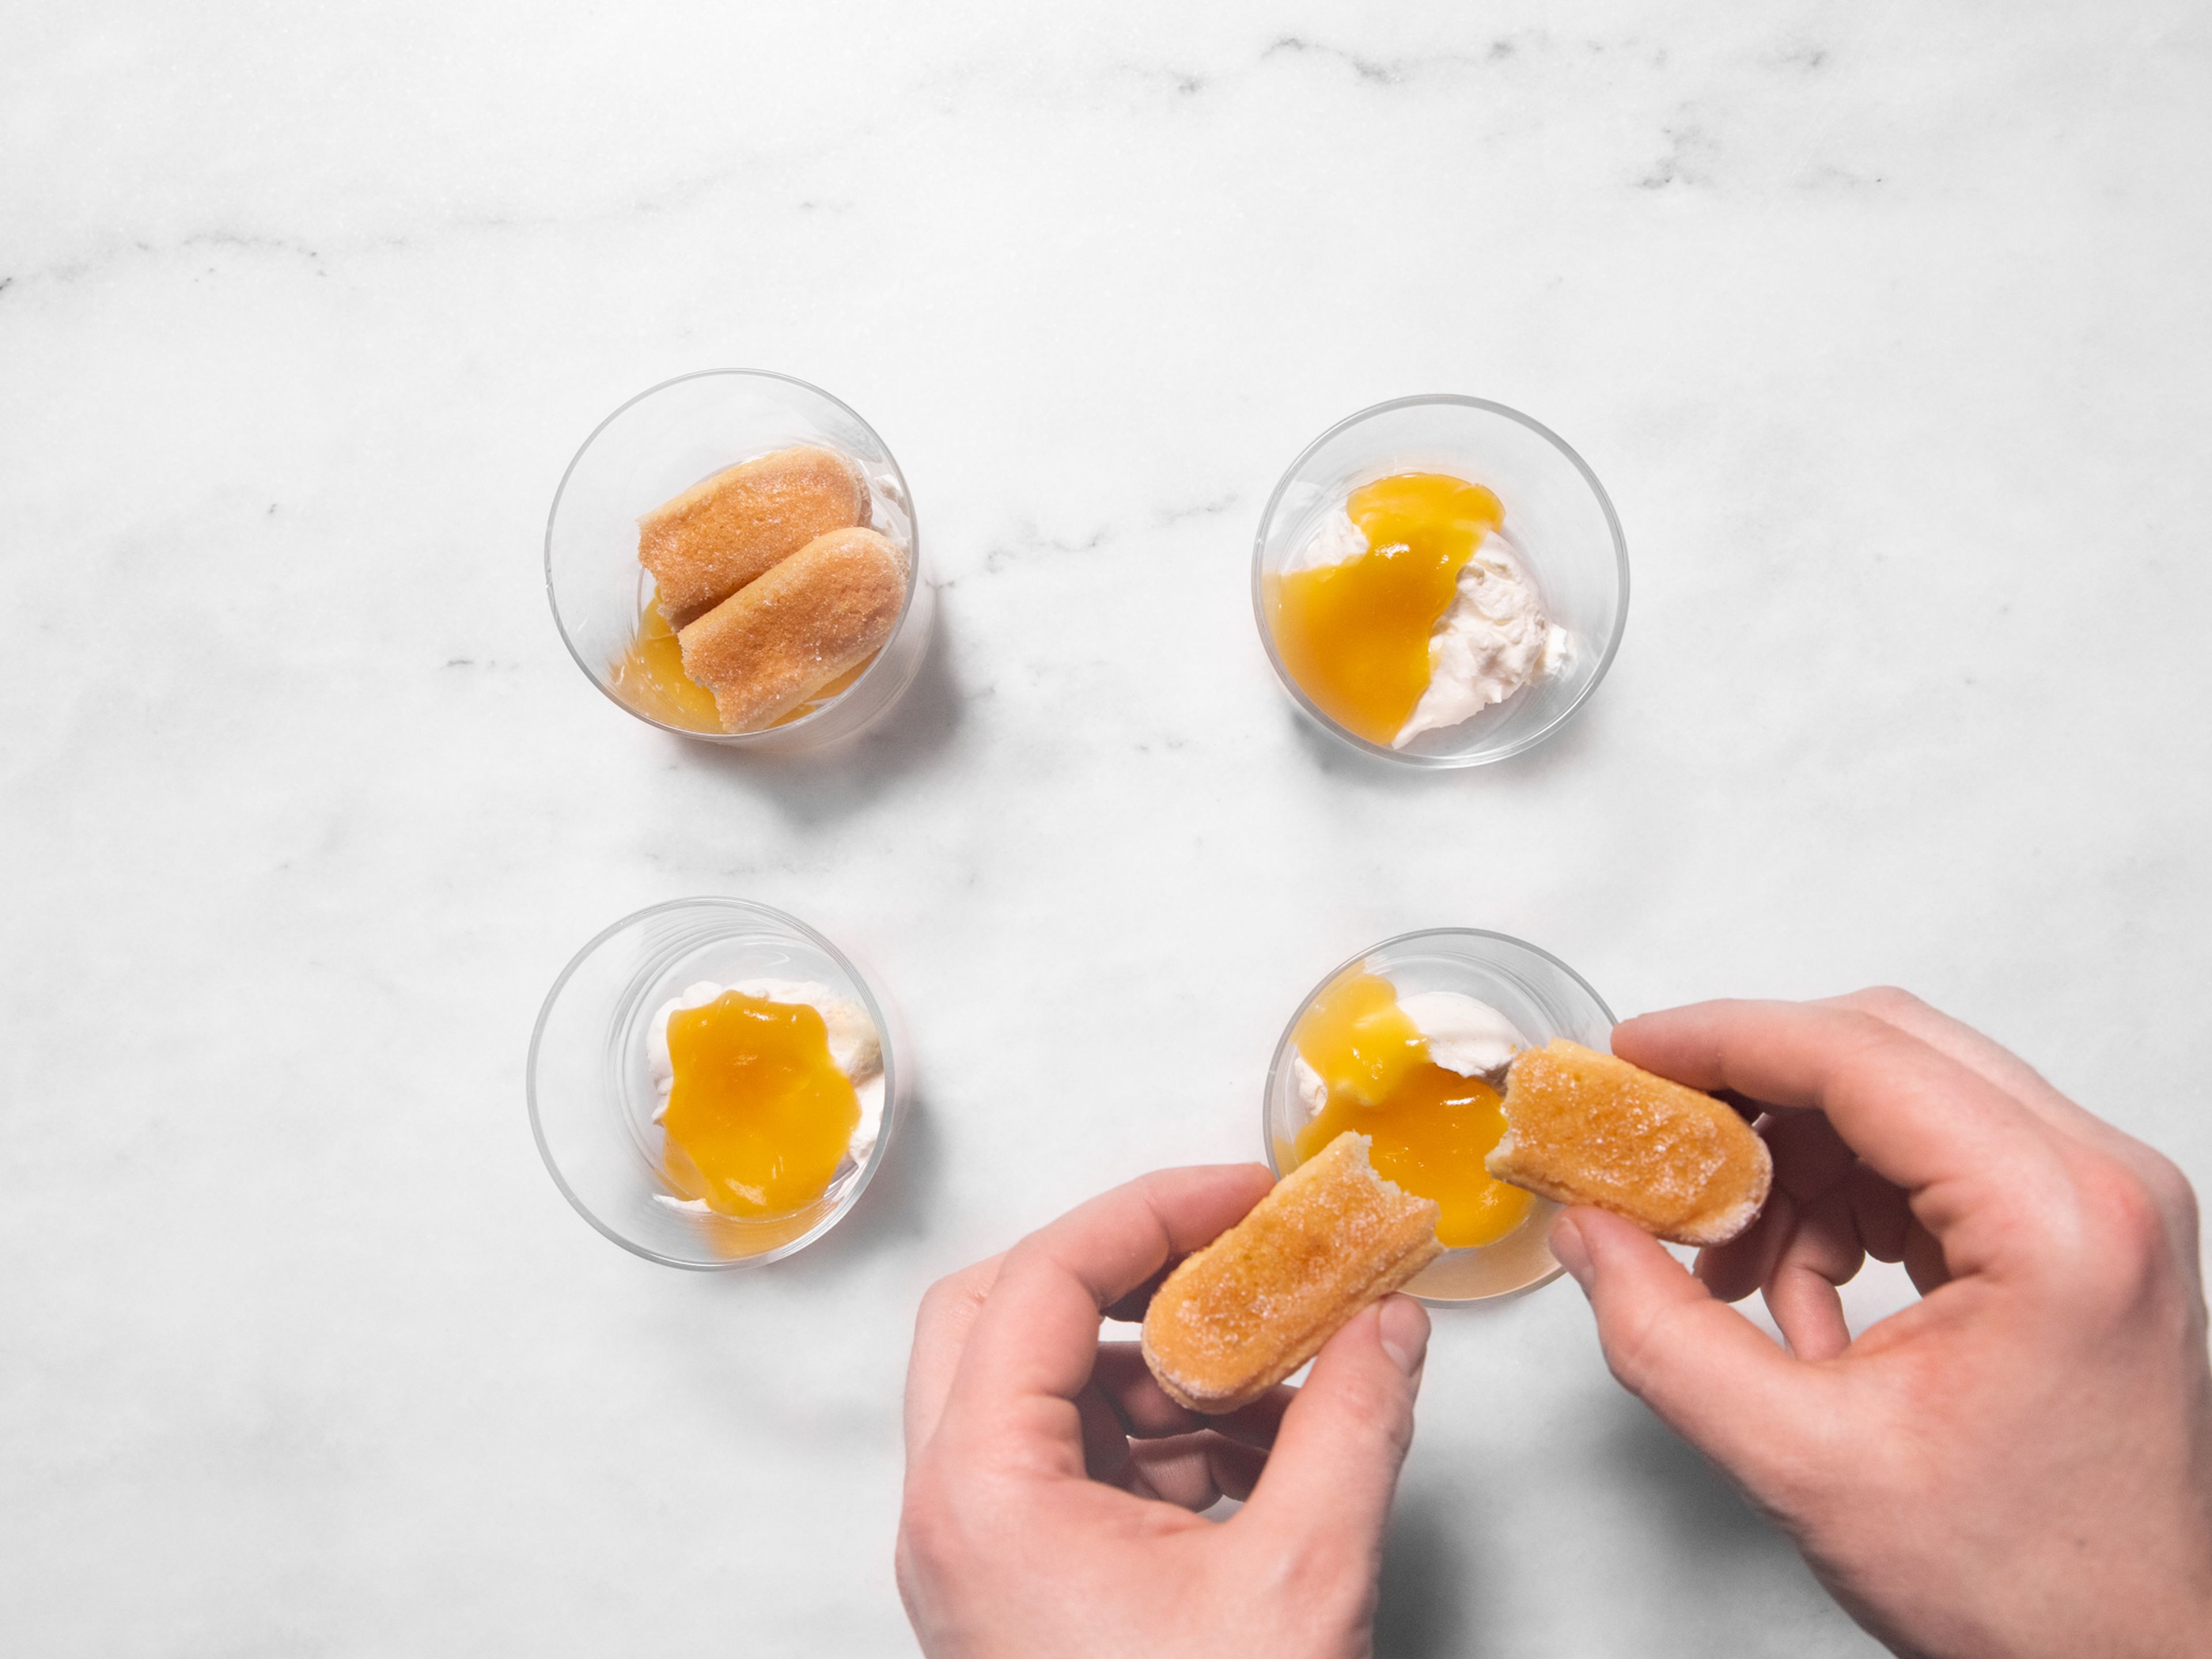 Layer the dessert in individual glasses in this order: cream mixture, lemon curd, dipped lady finger, lemon curd, cream mixture. Top with toasted cashews and remaining lemon zest. Enjoy!